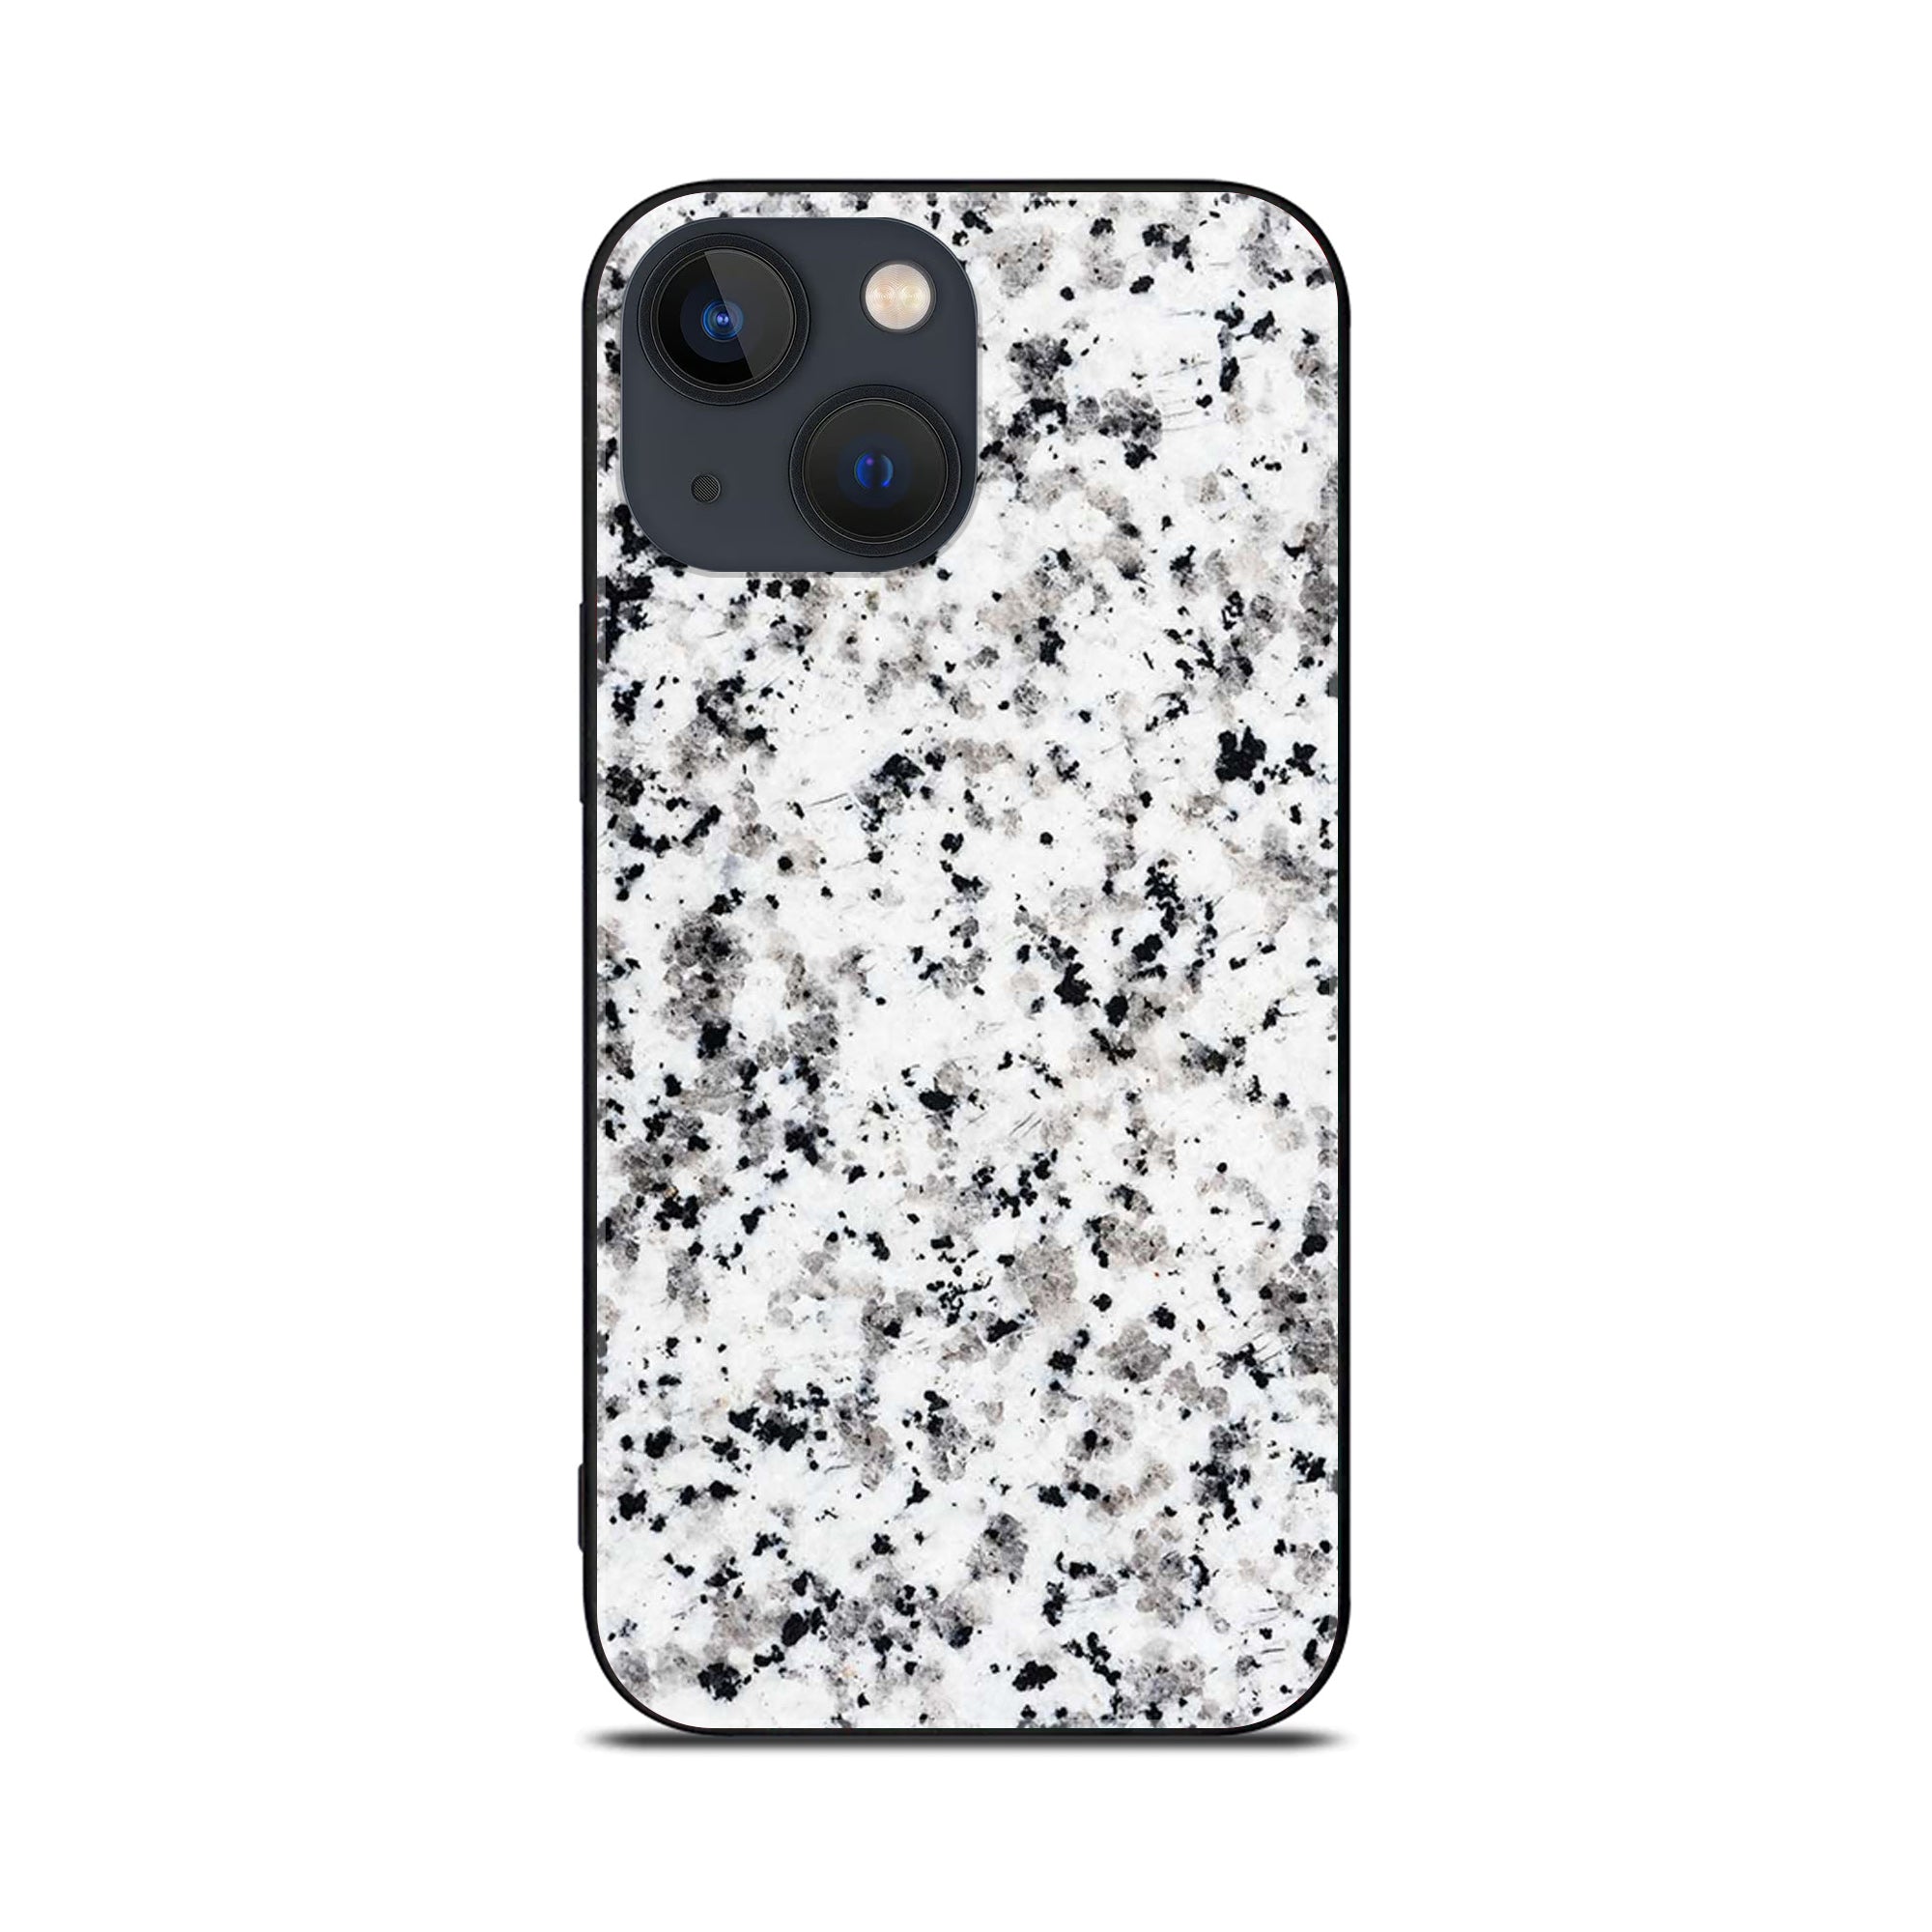 iPhone 14 - White  Marble Series - Premium Printed Glass soft Bumper shock Proof Case